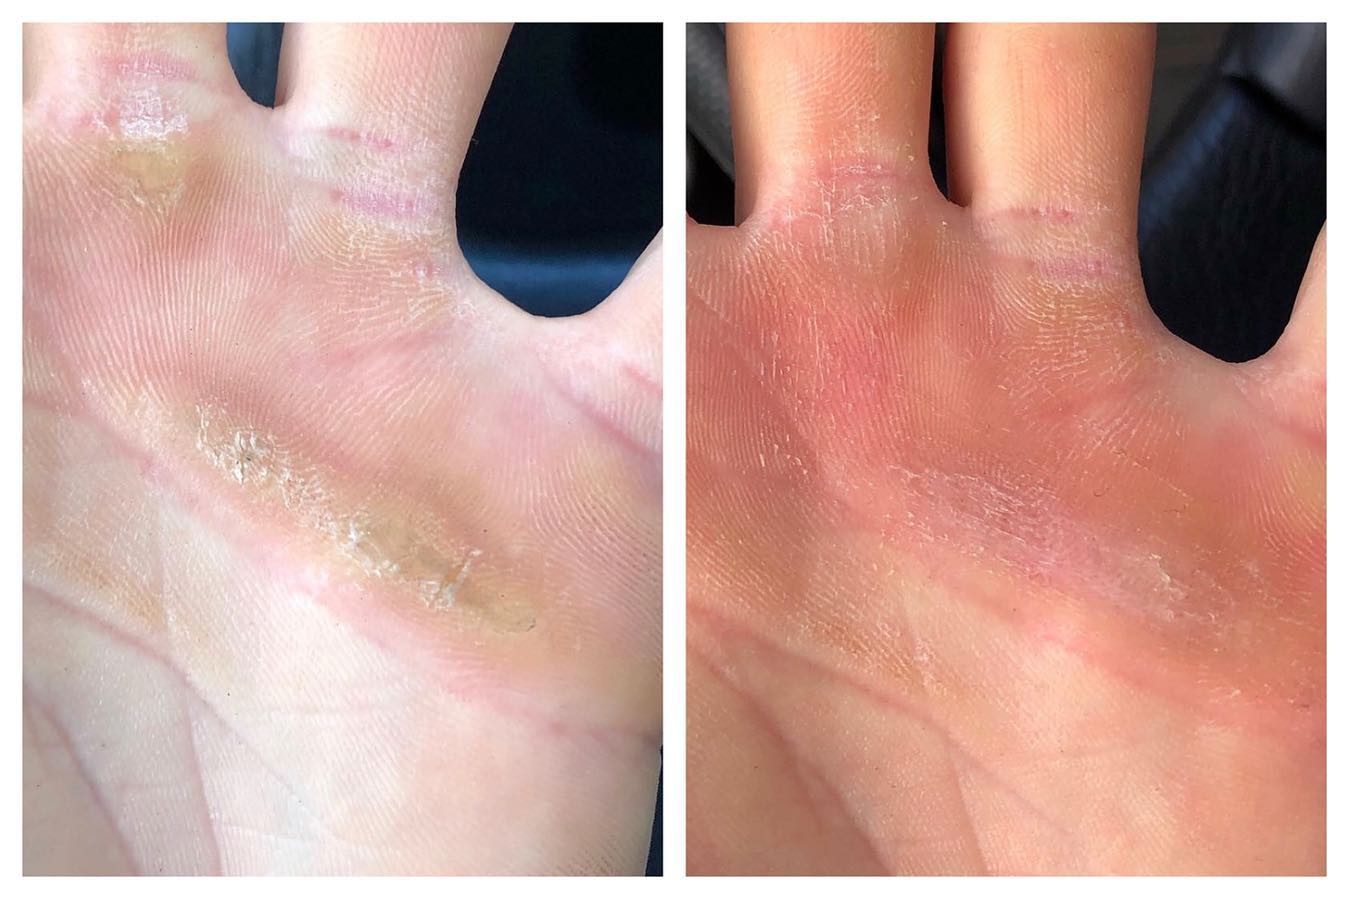 How to Care for Calluses on Your Hands from Lifting And Rowing